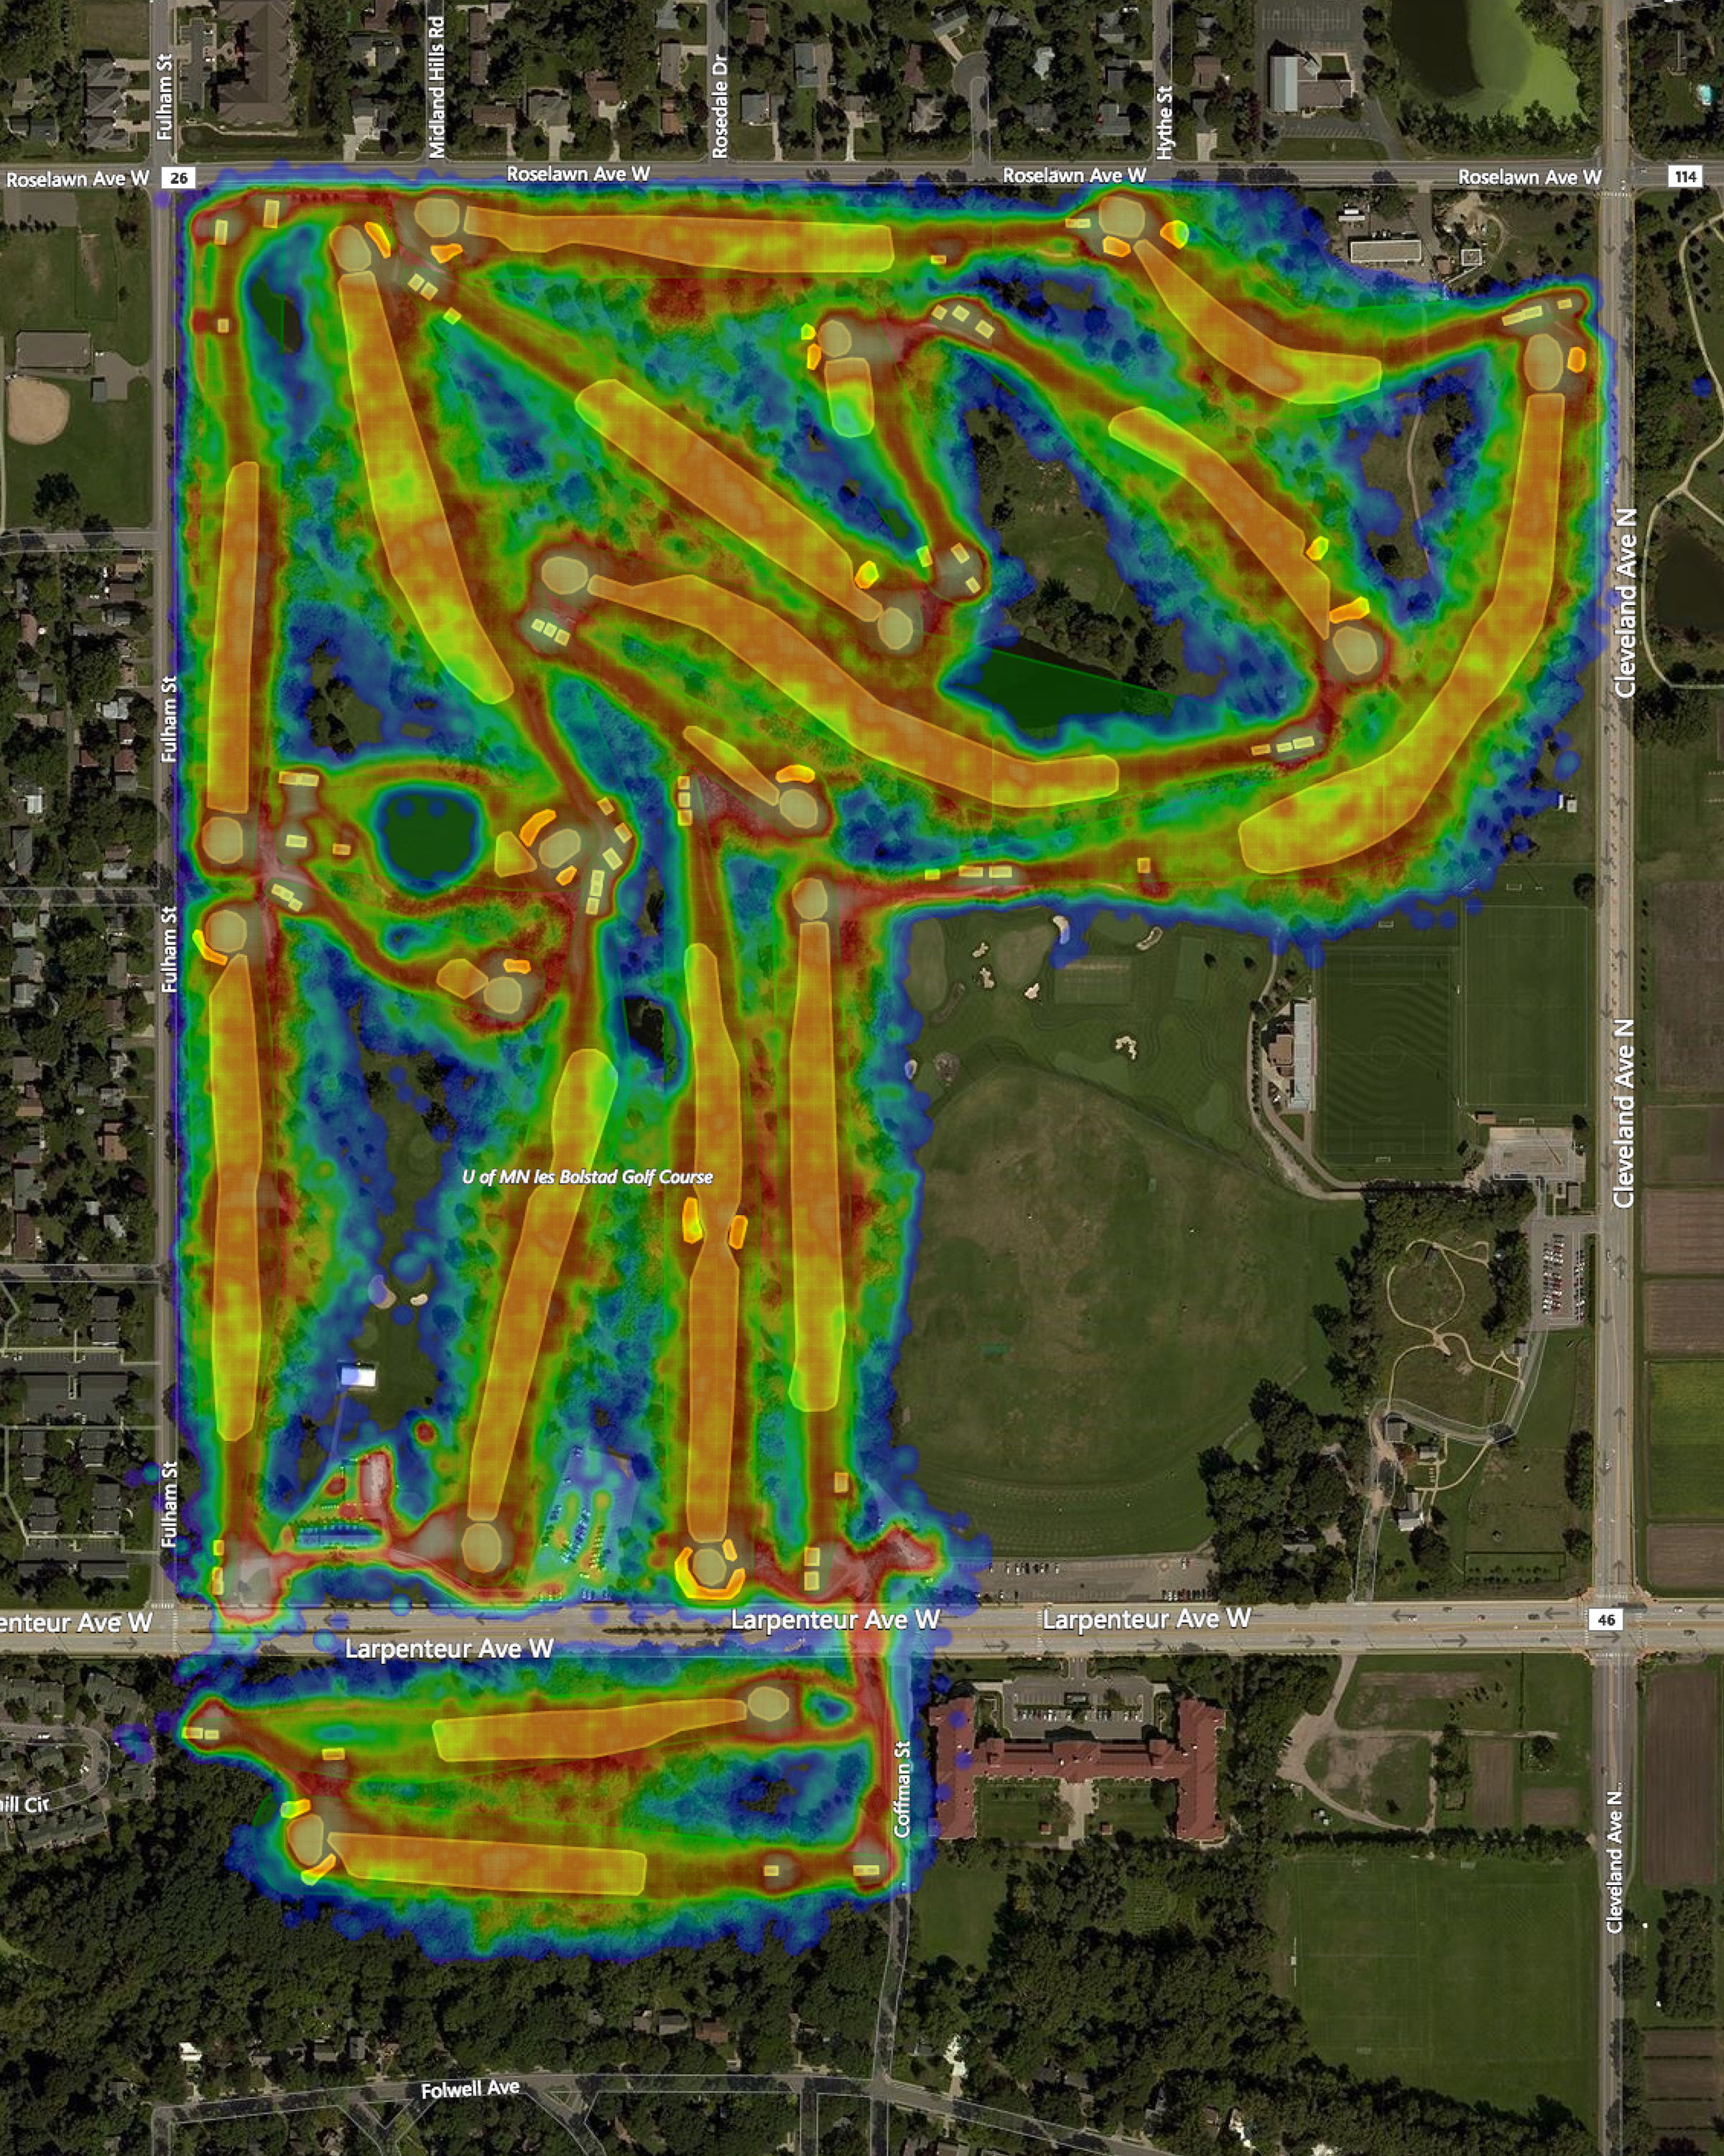 aerial view of Les Bolstad golf course with heat map overlay